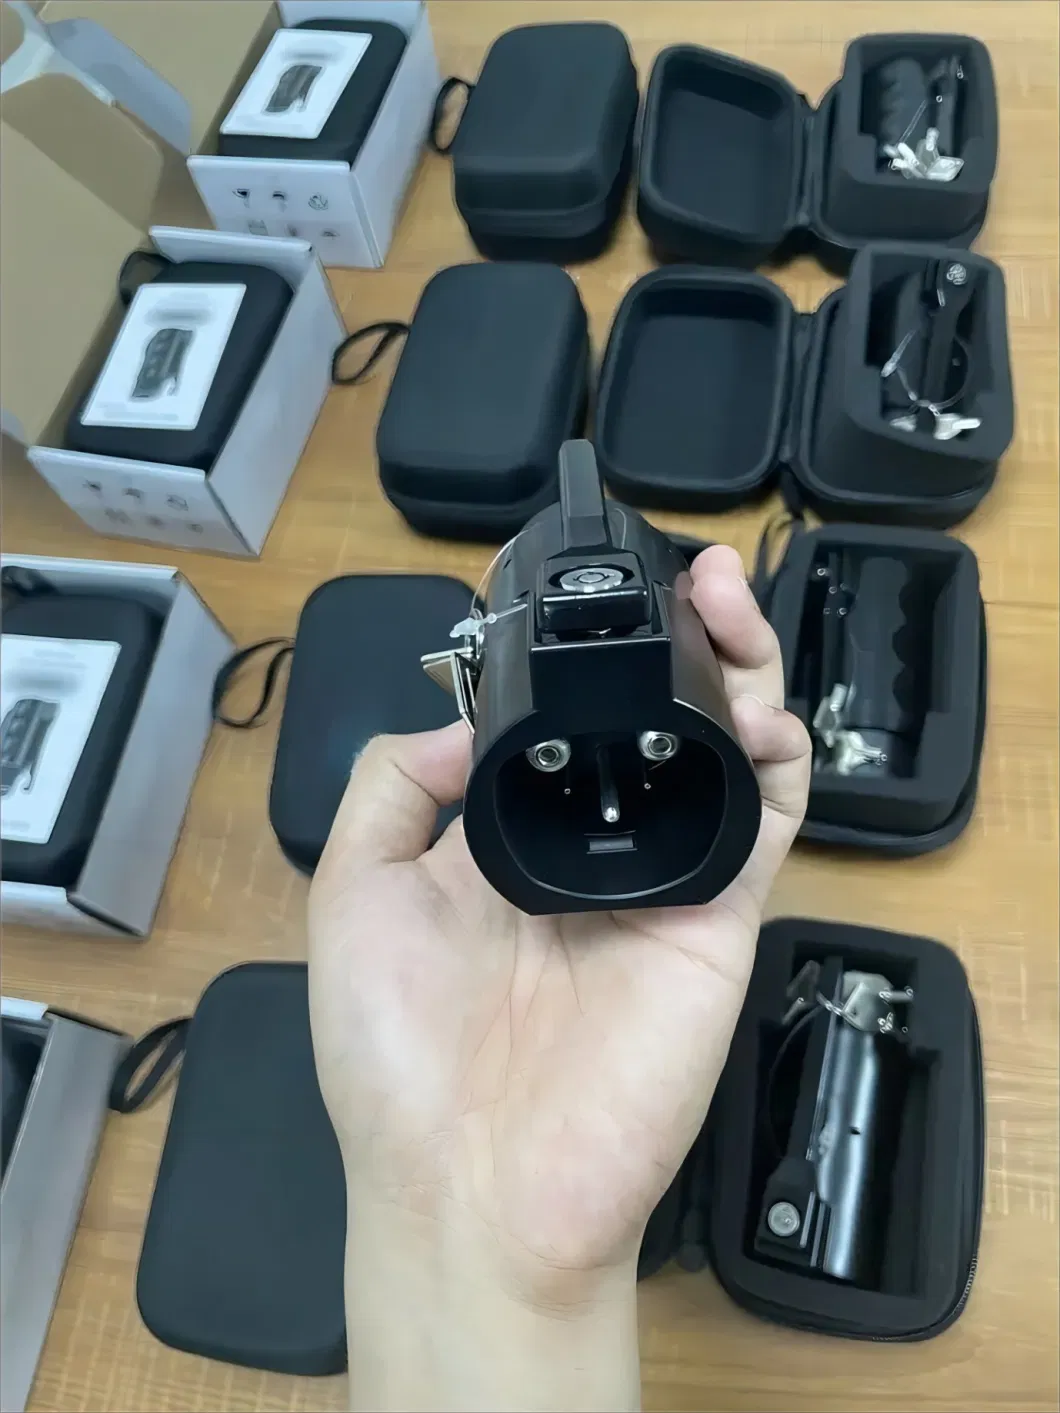 Factory Supports Custom Logo Color Electric Car Electric Car Charger Connector Tesla to Type 1 Plug Charging Tesla to J1772 Adapter Tesla